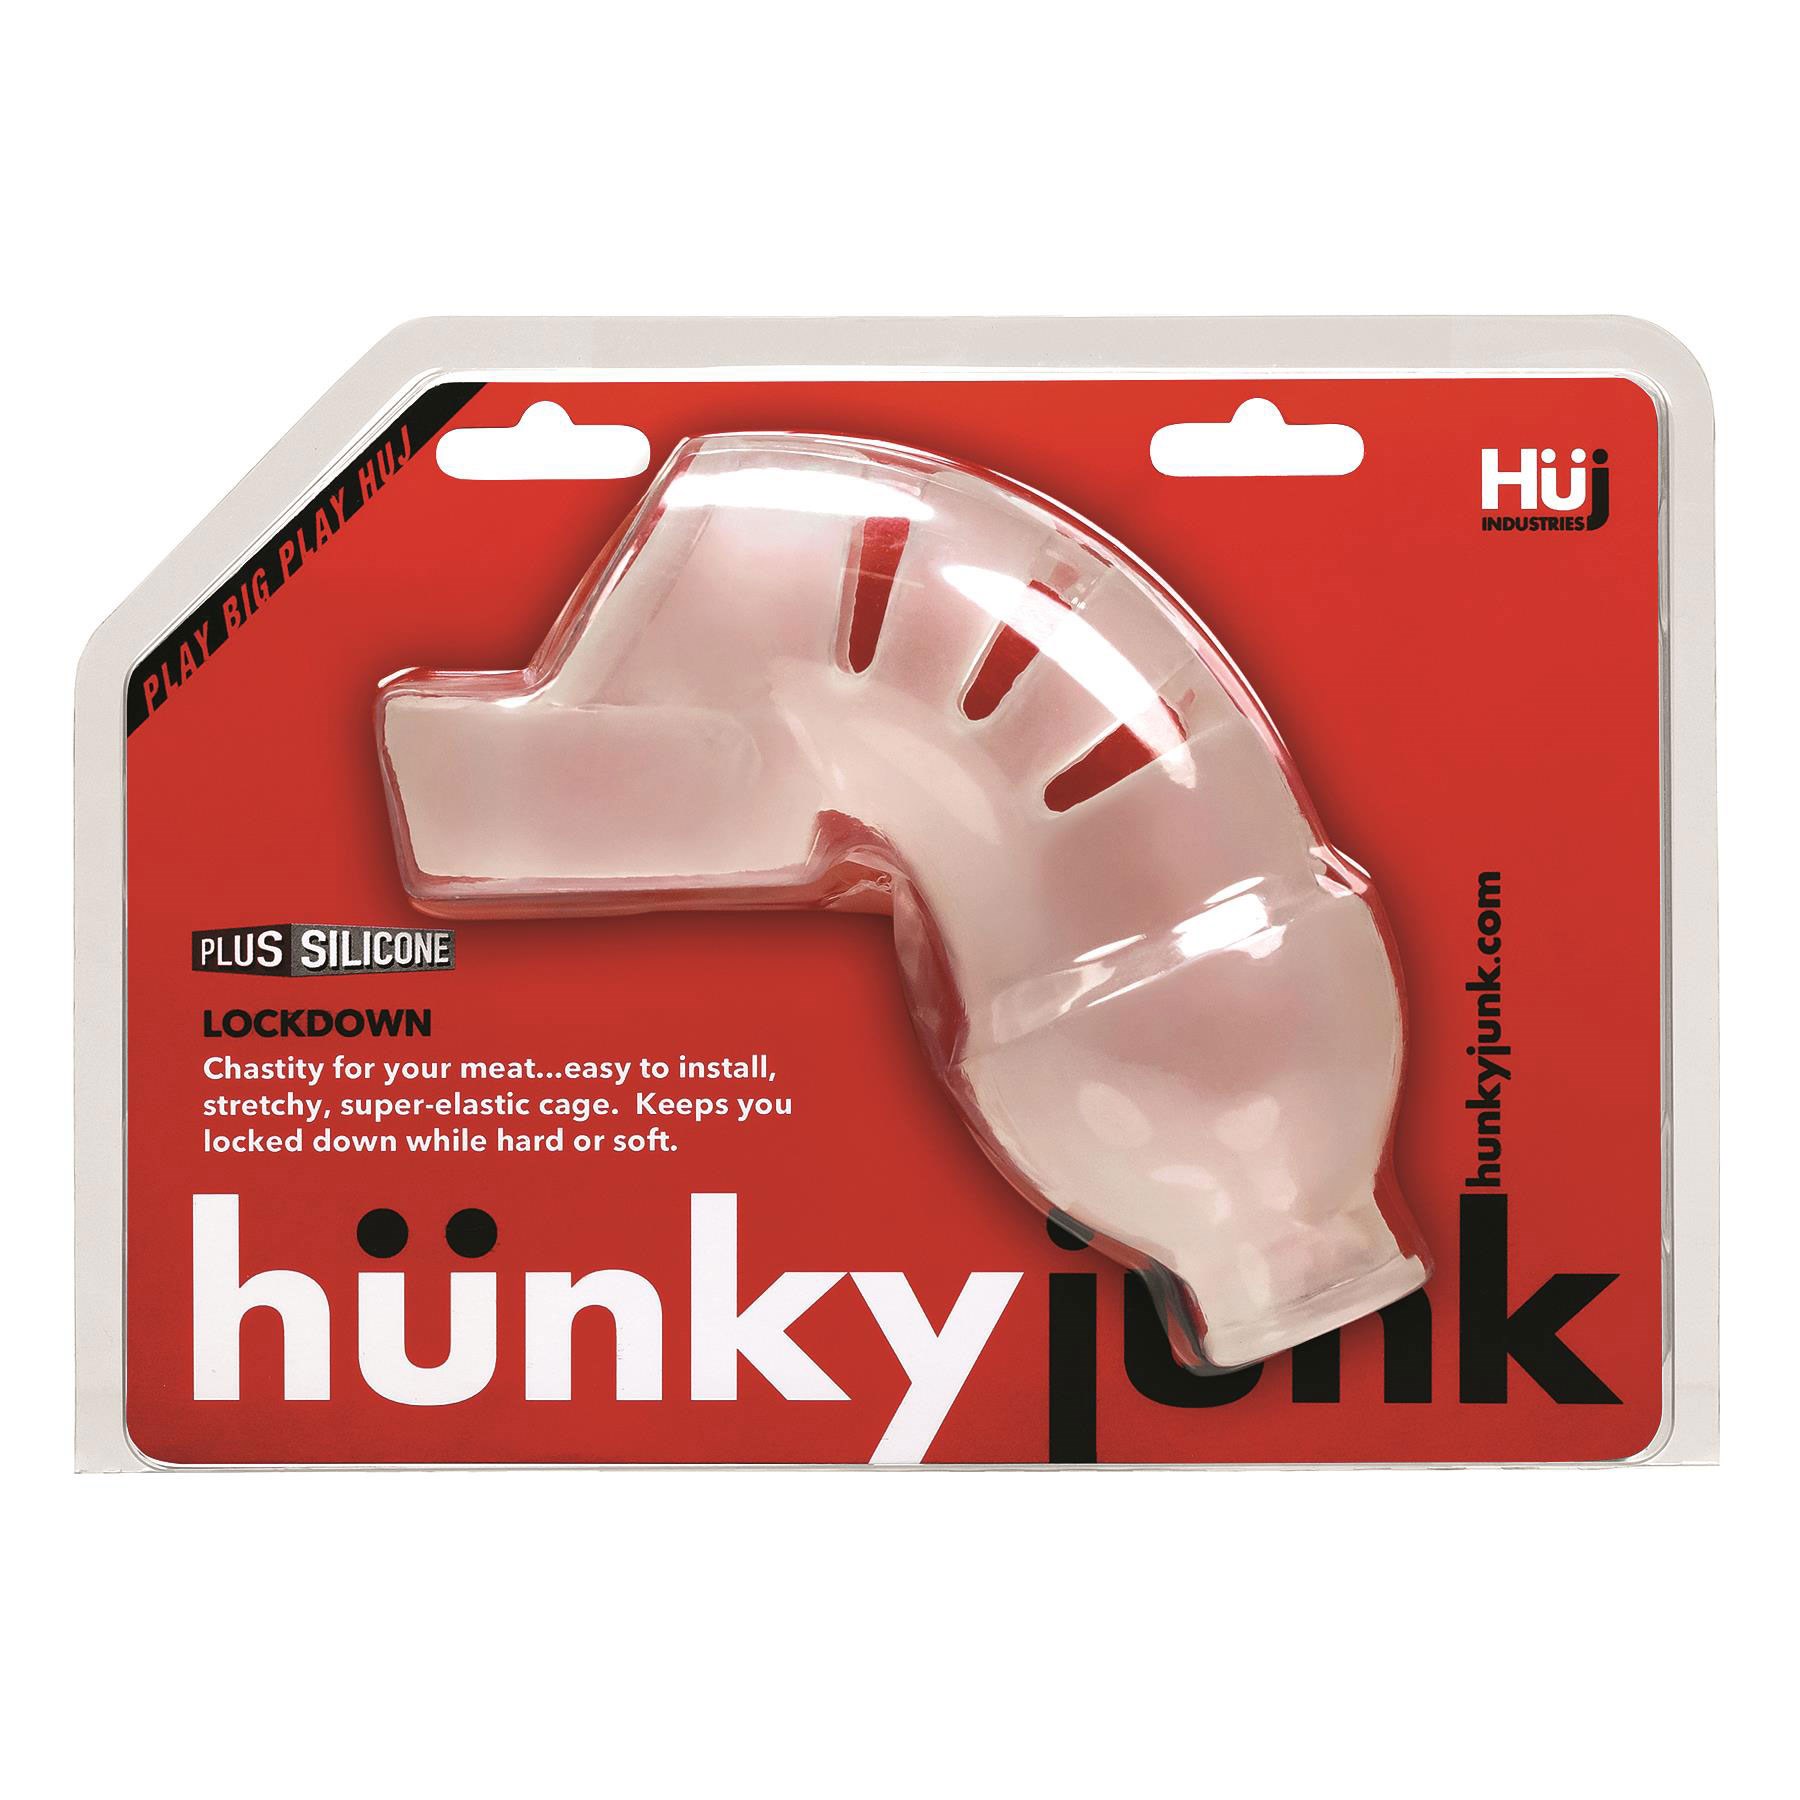 Lockdown Chastity Cage packaging